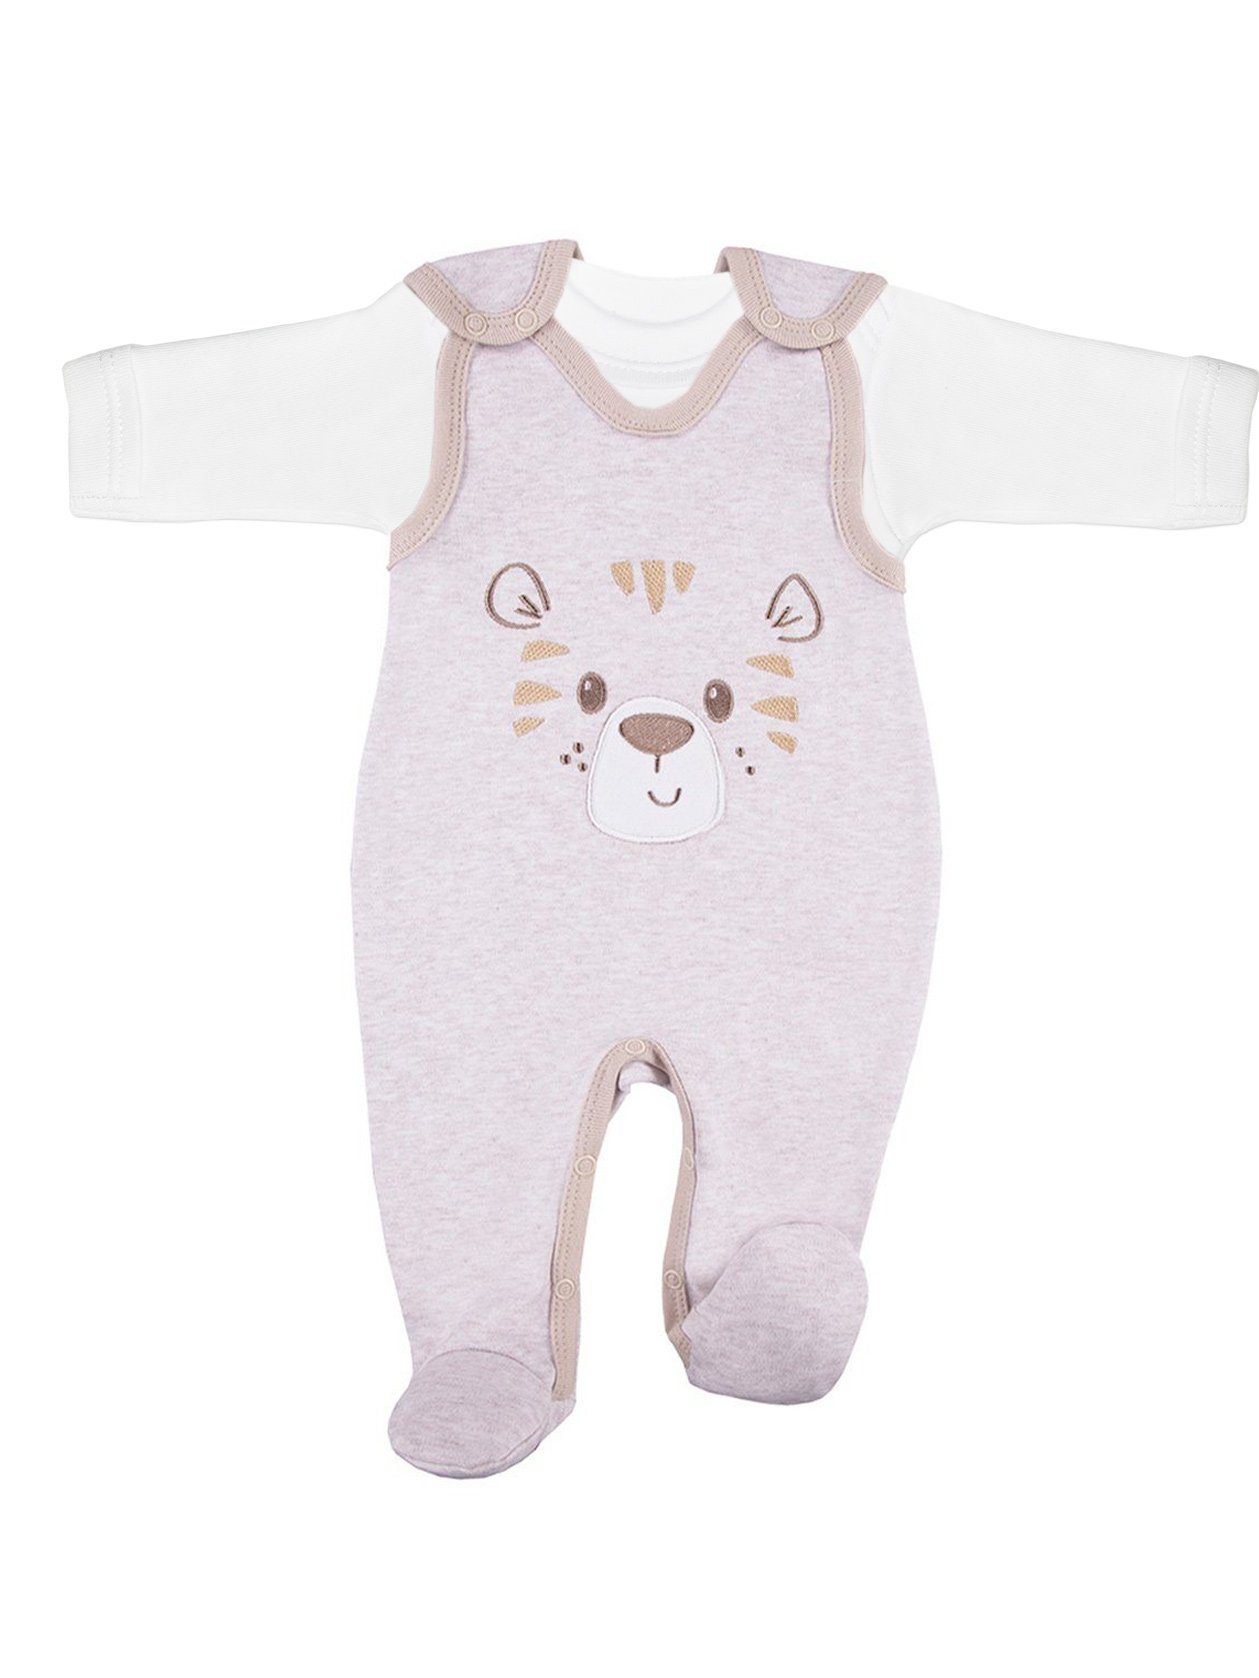 Early Baby Top & Tiger Footed Dungarees Set - Ecru Dungaree EEVI 